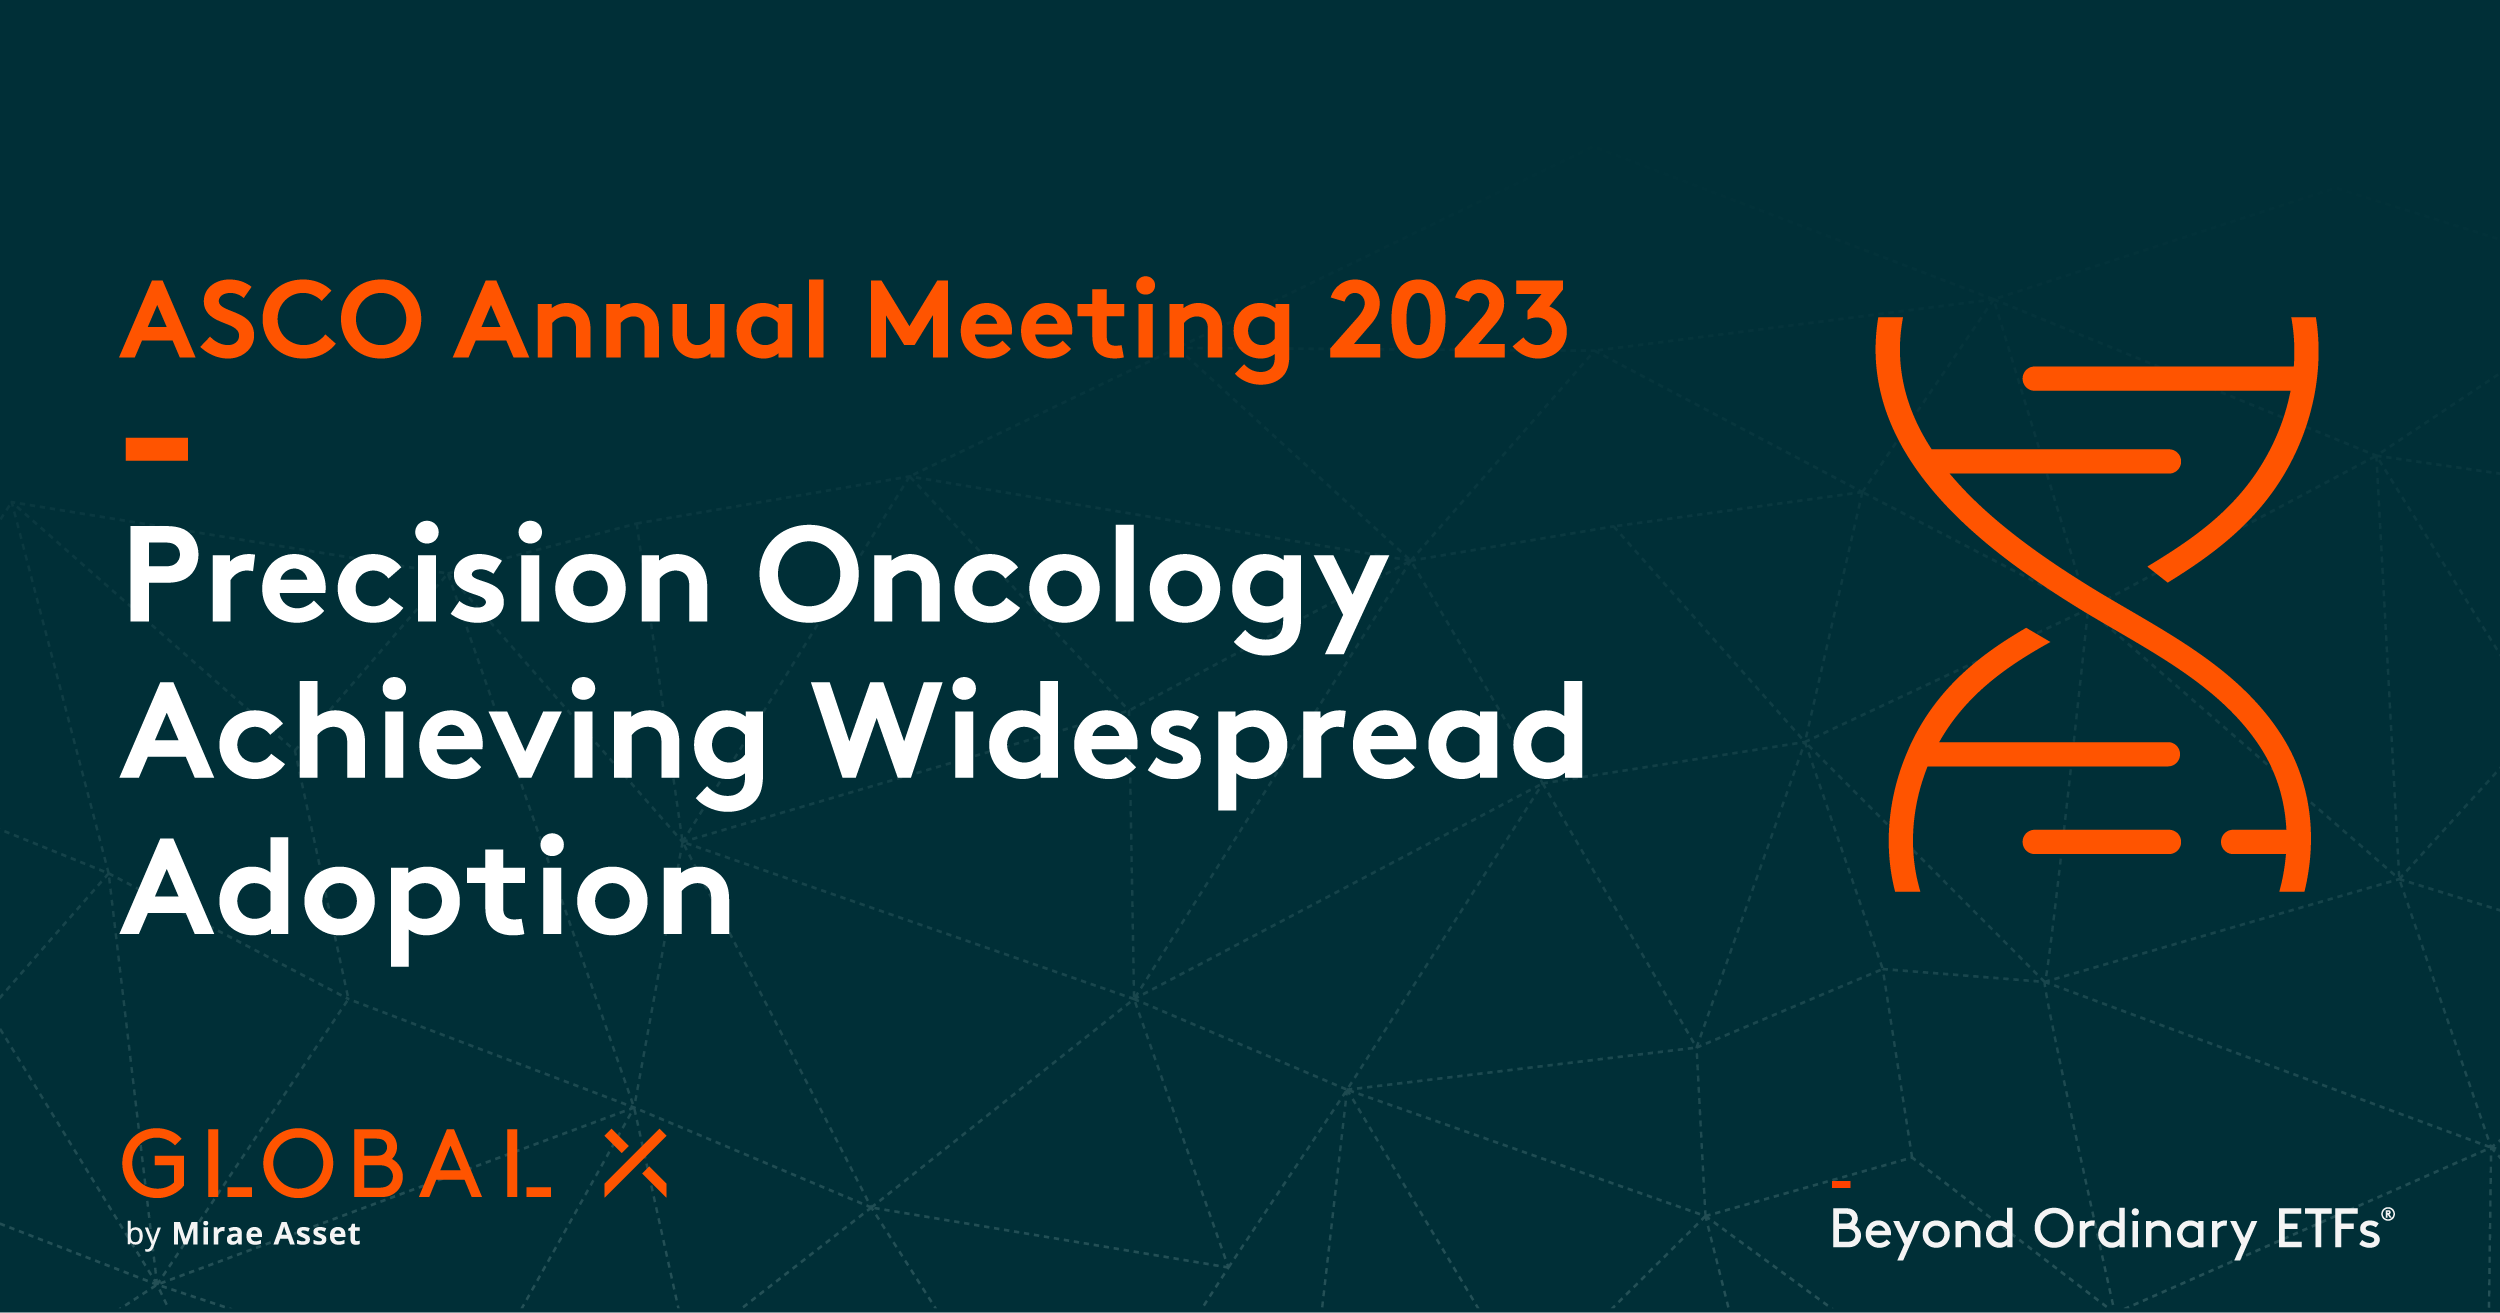 ASCO Annual Meeting 2023 Precision Oncology Achieving Widespread